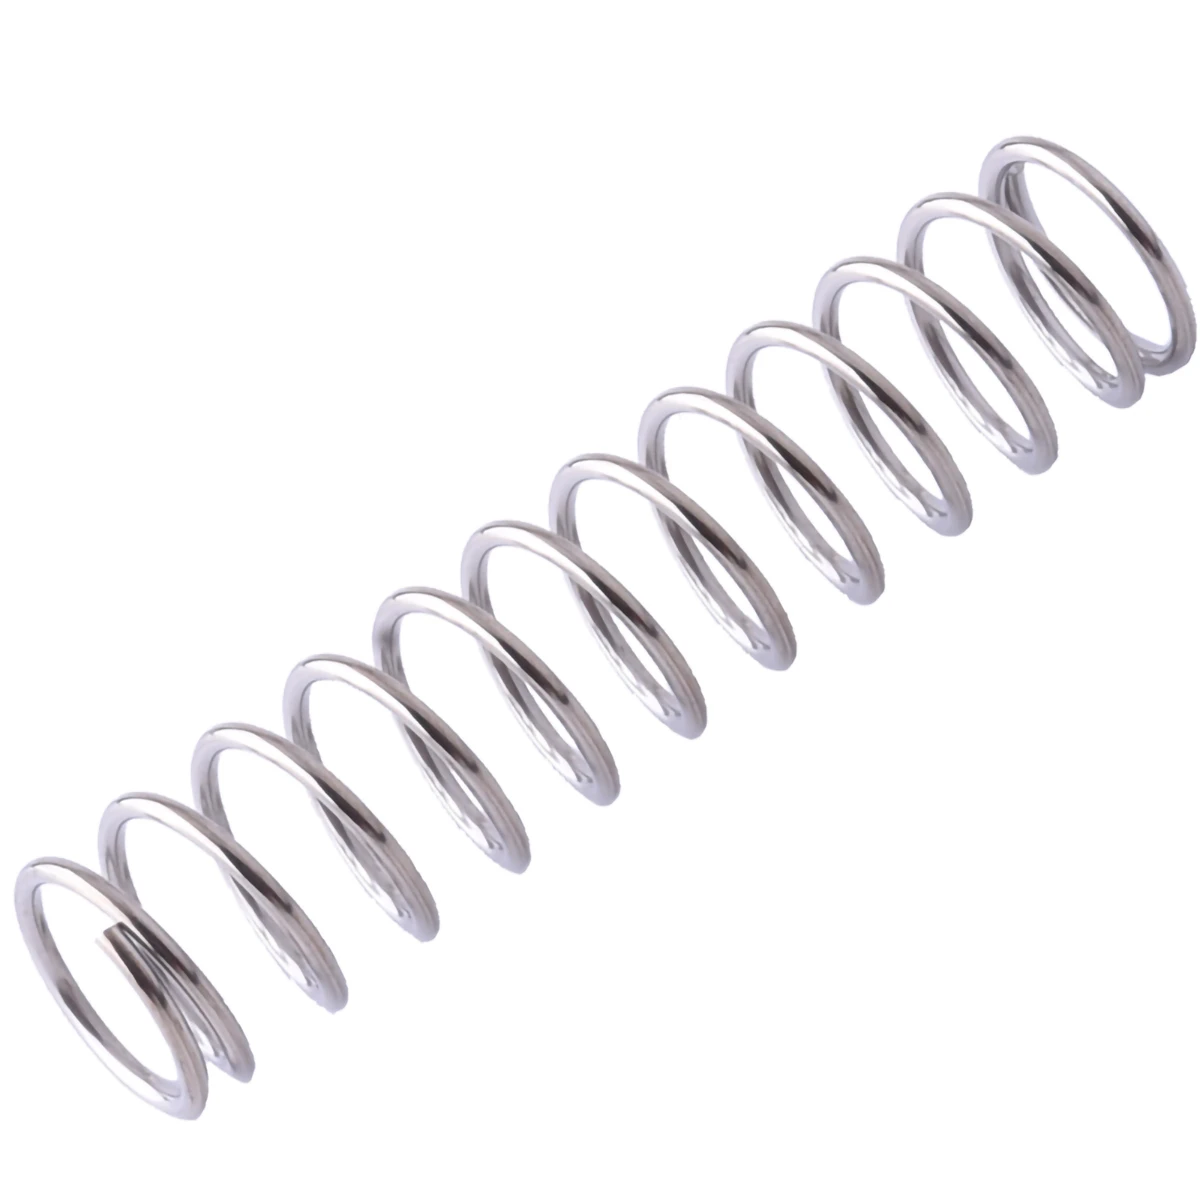 0.8x8x35mm 304 Stainless Steel Compression Spring Pressure Small Spring 